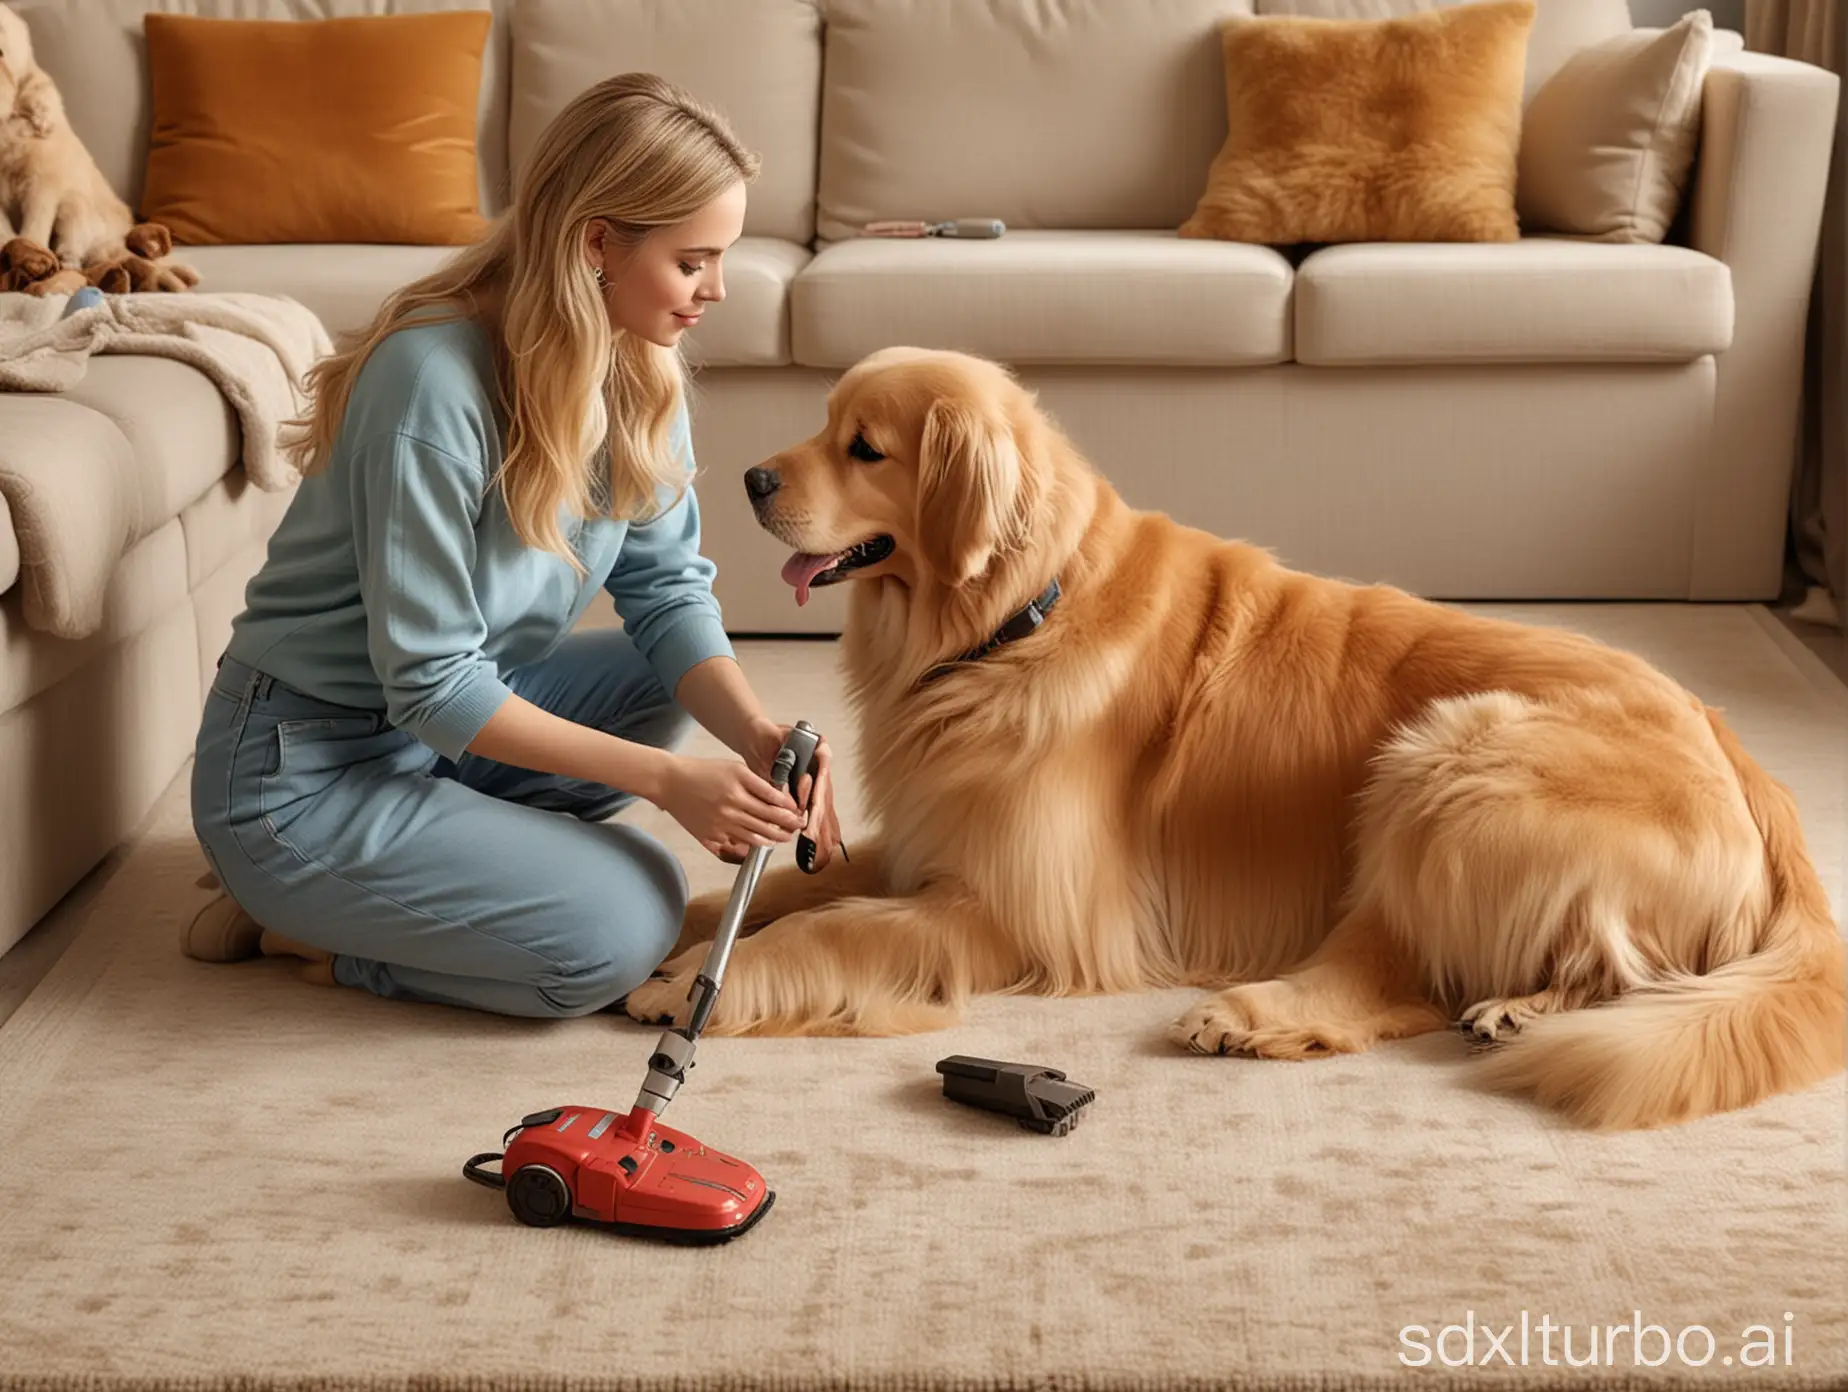 A foreign beauty is sitting on the carpet in the living room, holding a pet vacuum grooming tool and grooming the fur of a Golden Retriever. The scene is realistic, the characters are realistic, and the Golden Retriever is also realistic.